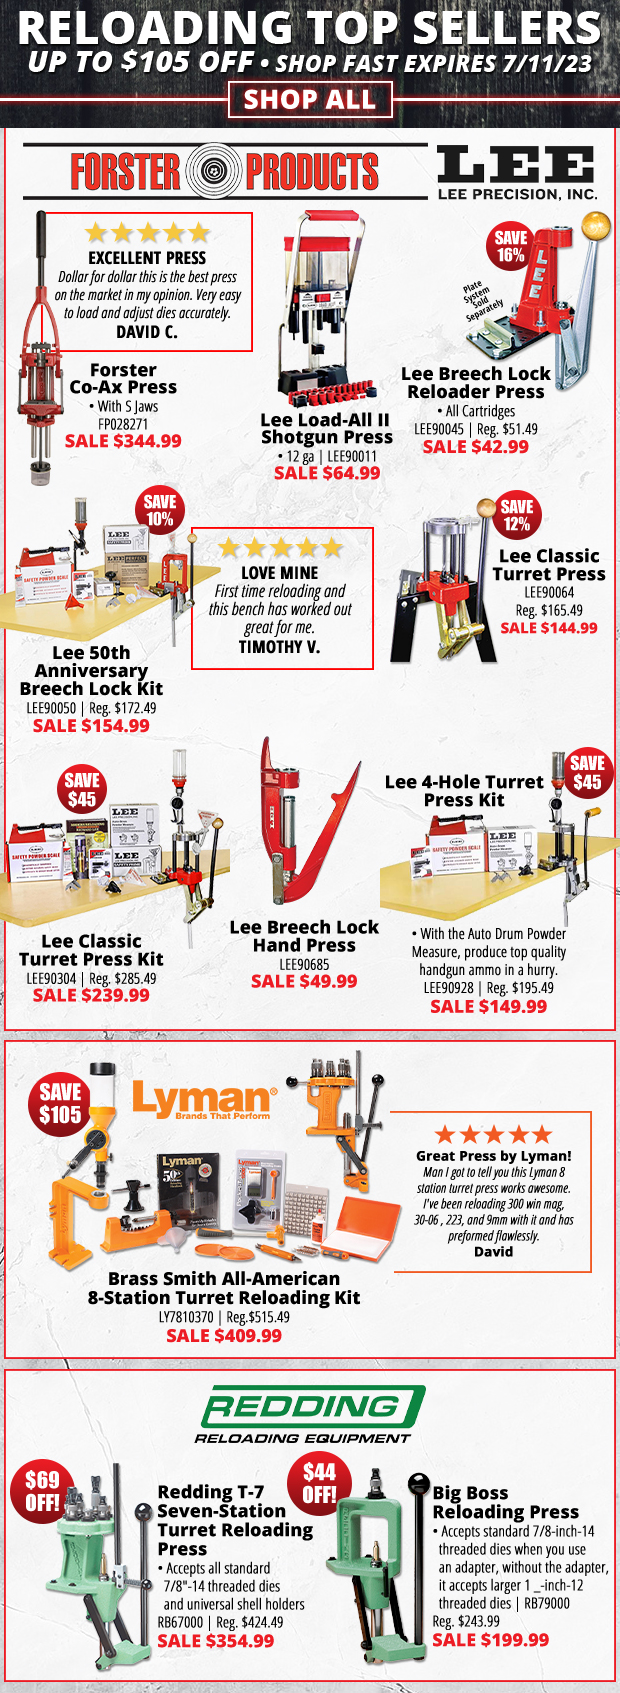 Up to $105 Off Reloading Top Sellers